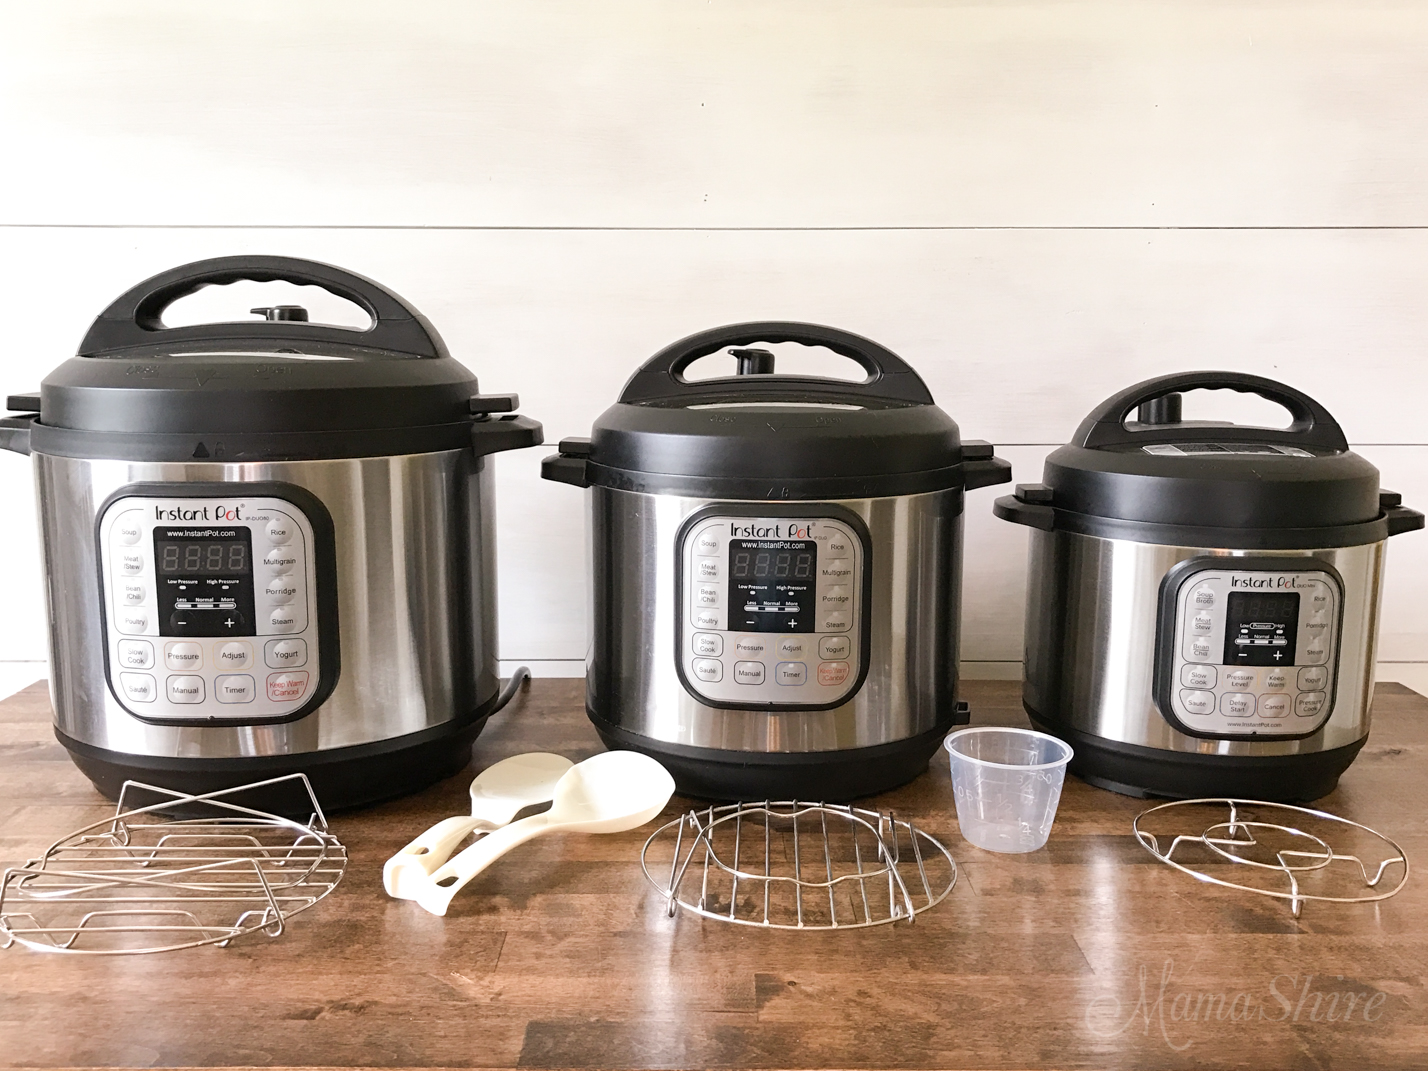 Goldilocks and the Three Instant Pots. Comparing three different sizes - 8 qt., 6 qt, and 3 qt of Instant Pots. Which one is just right for you?